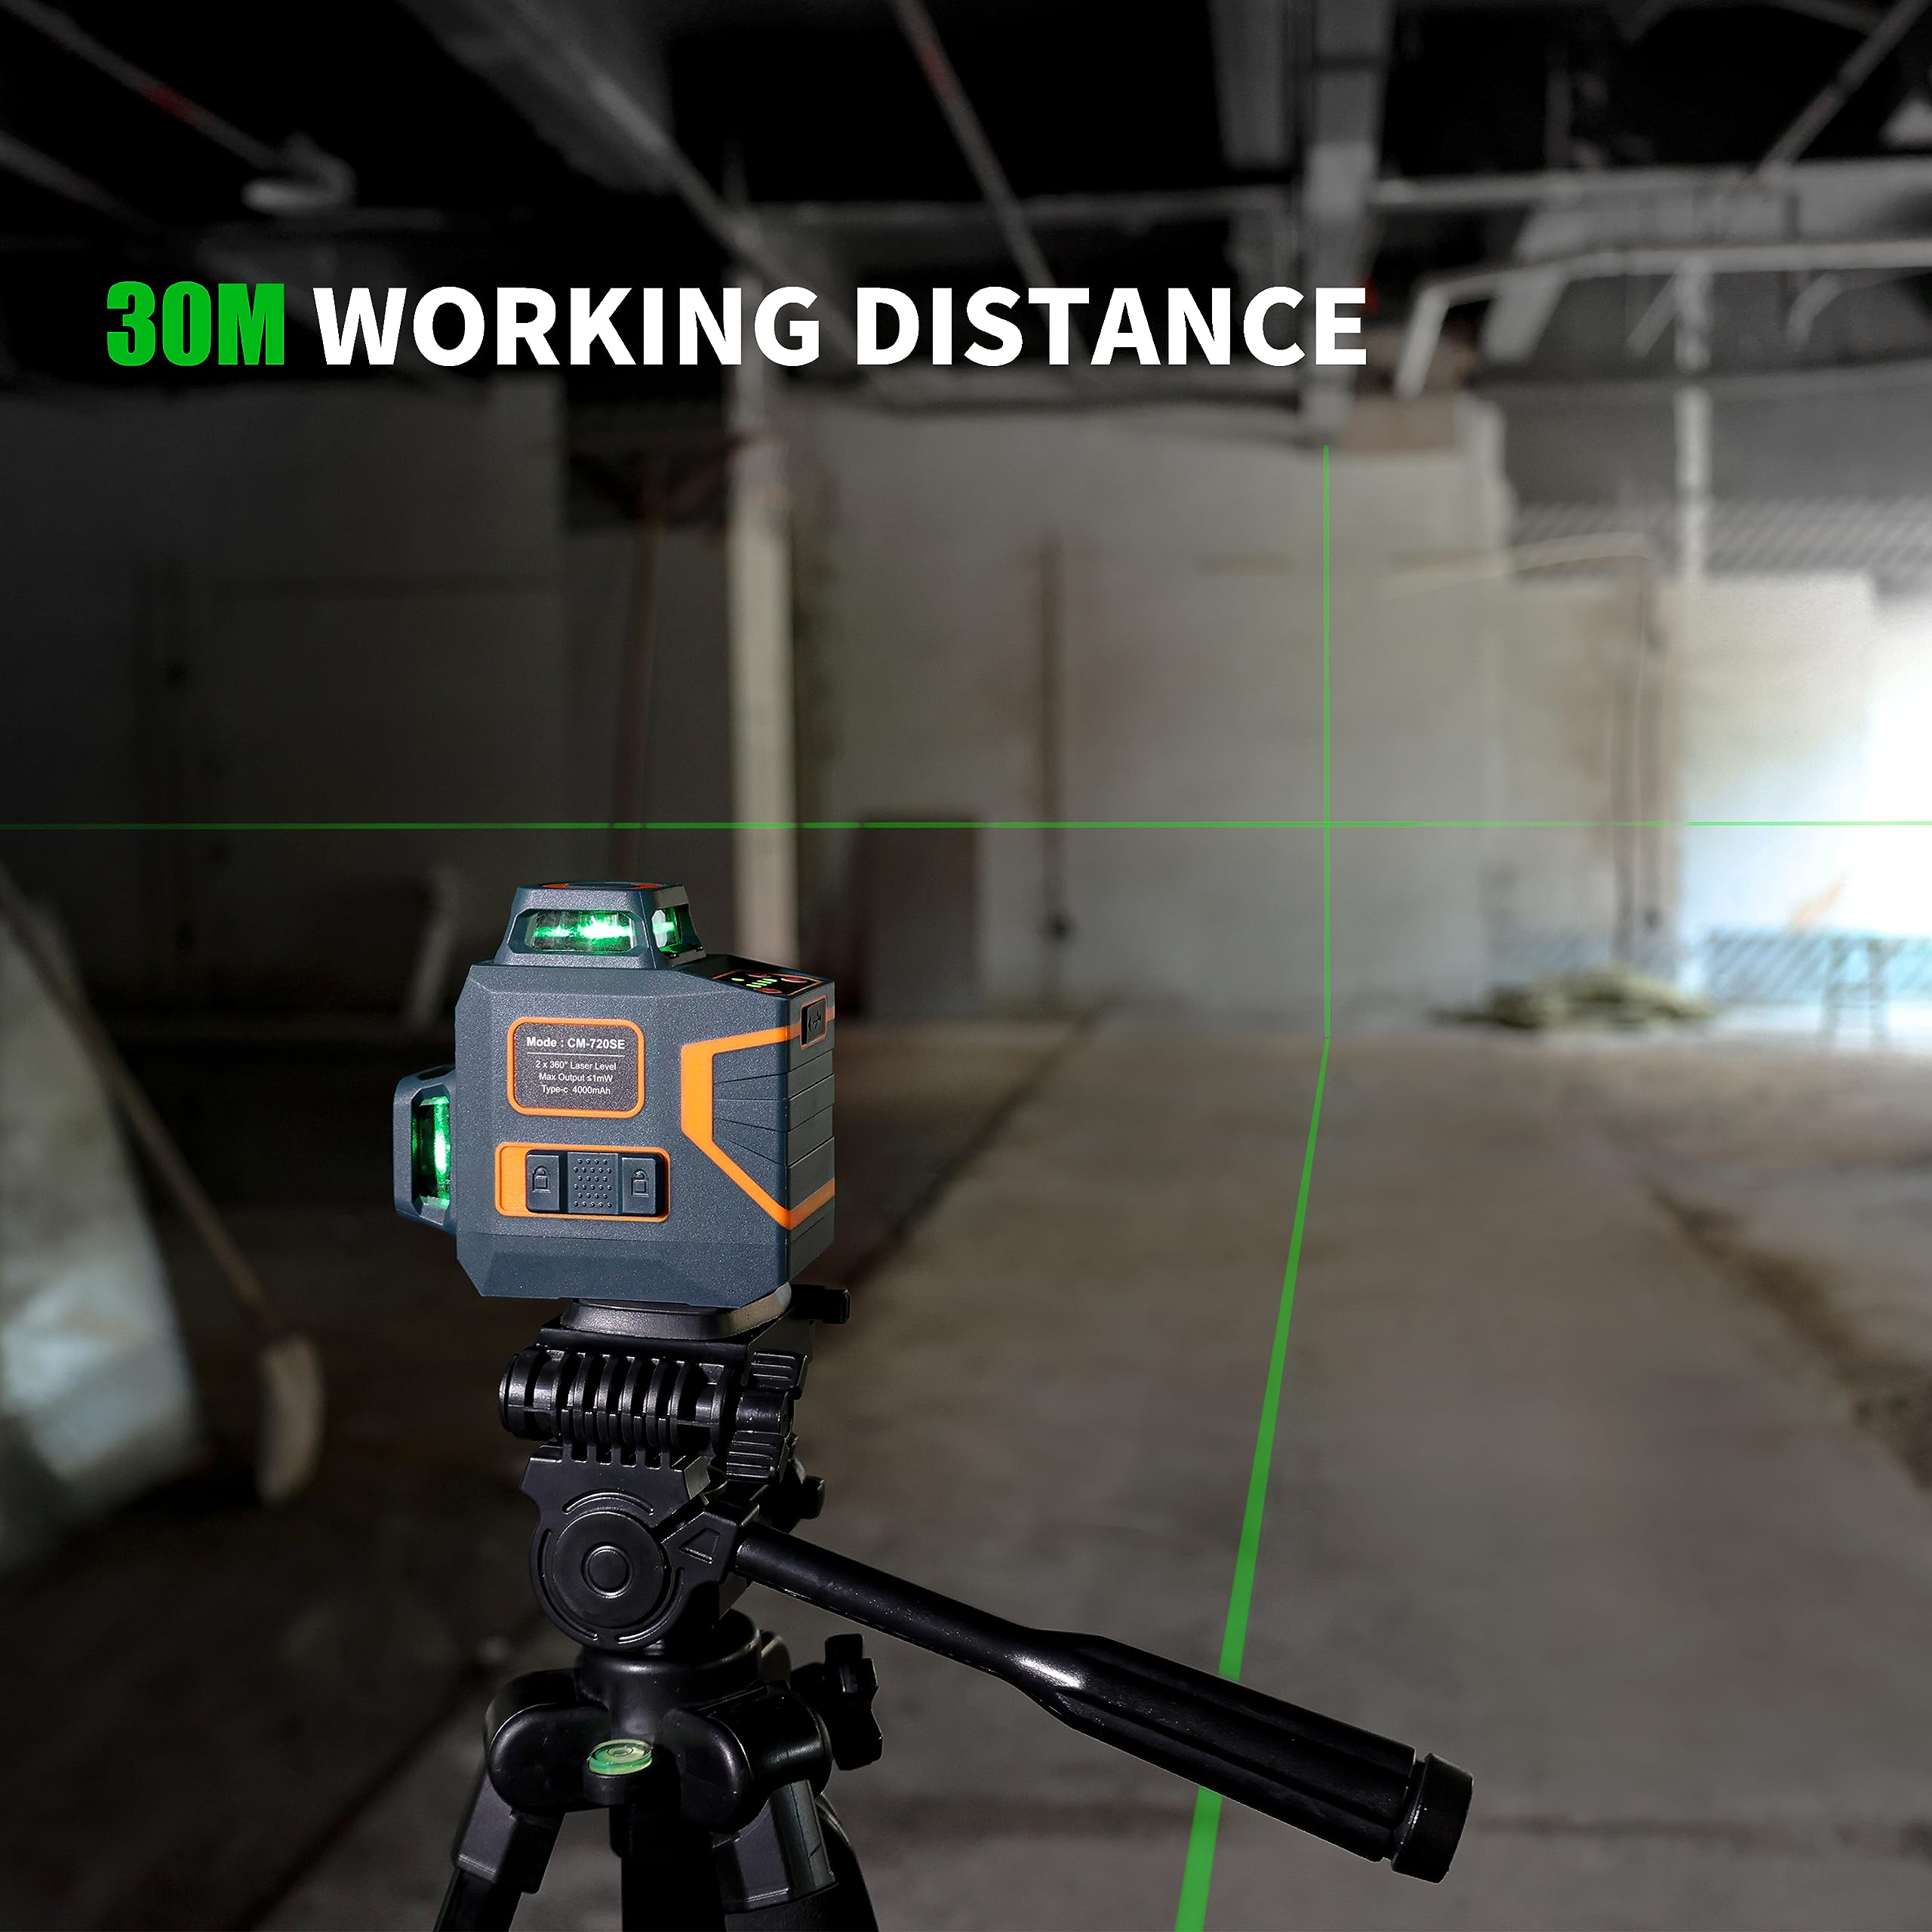 CIGMAN CM-720SE 8 Lines Laser Level  Self Leveling 3x360° Green Cross Line for Construction, Picture Hanging and Decoration with Rechargeable Battery and Magnetic L-Shaped Bracket Included